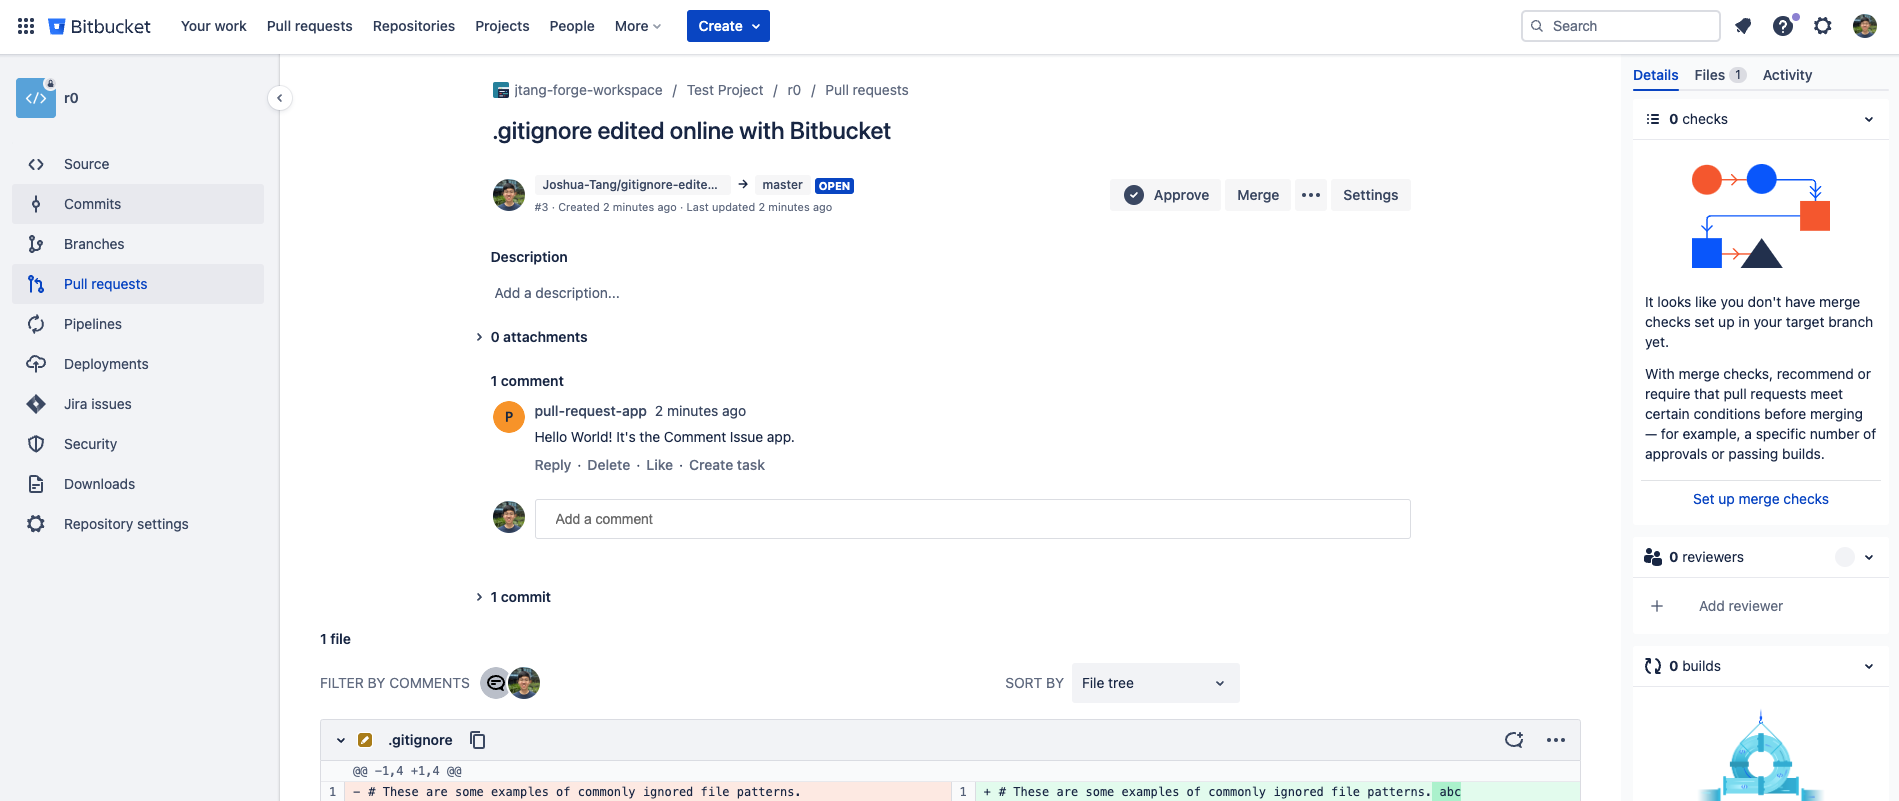 The final app displays on a Bitbucket workspace